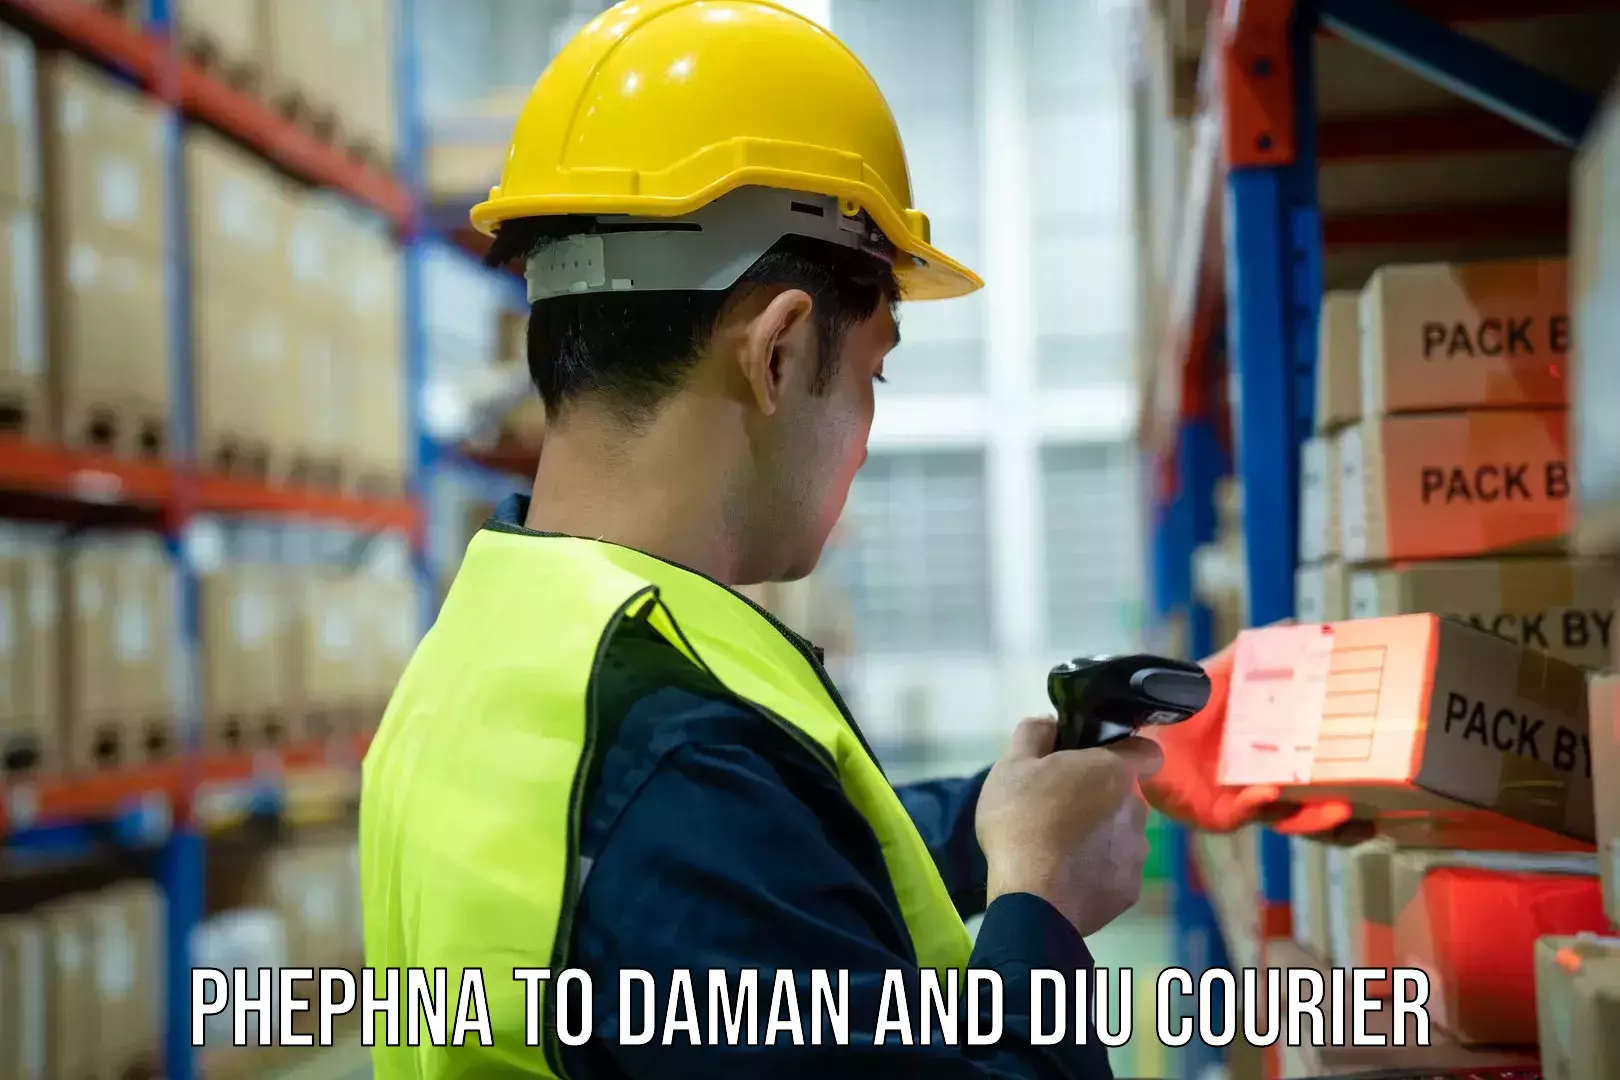 Parcel delivery automation Phephna to Diu